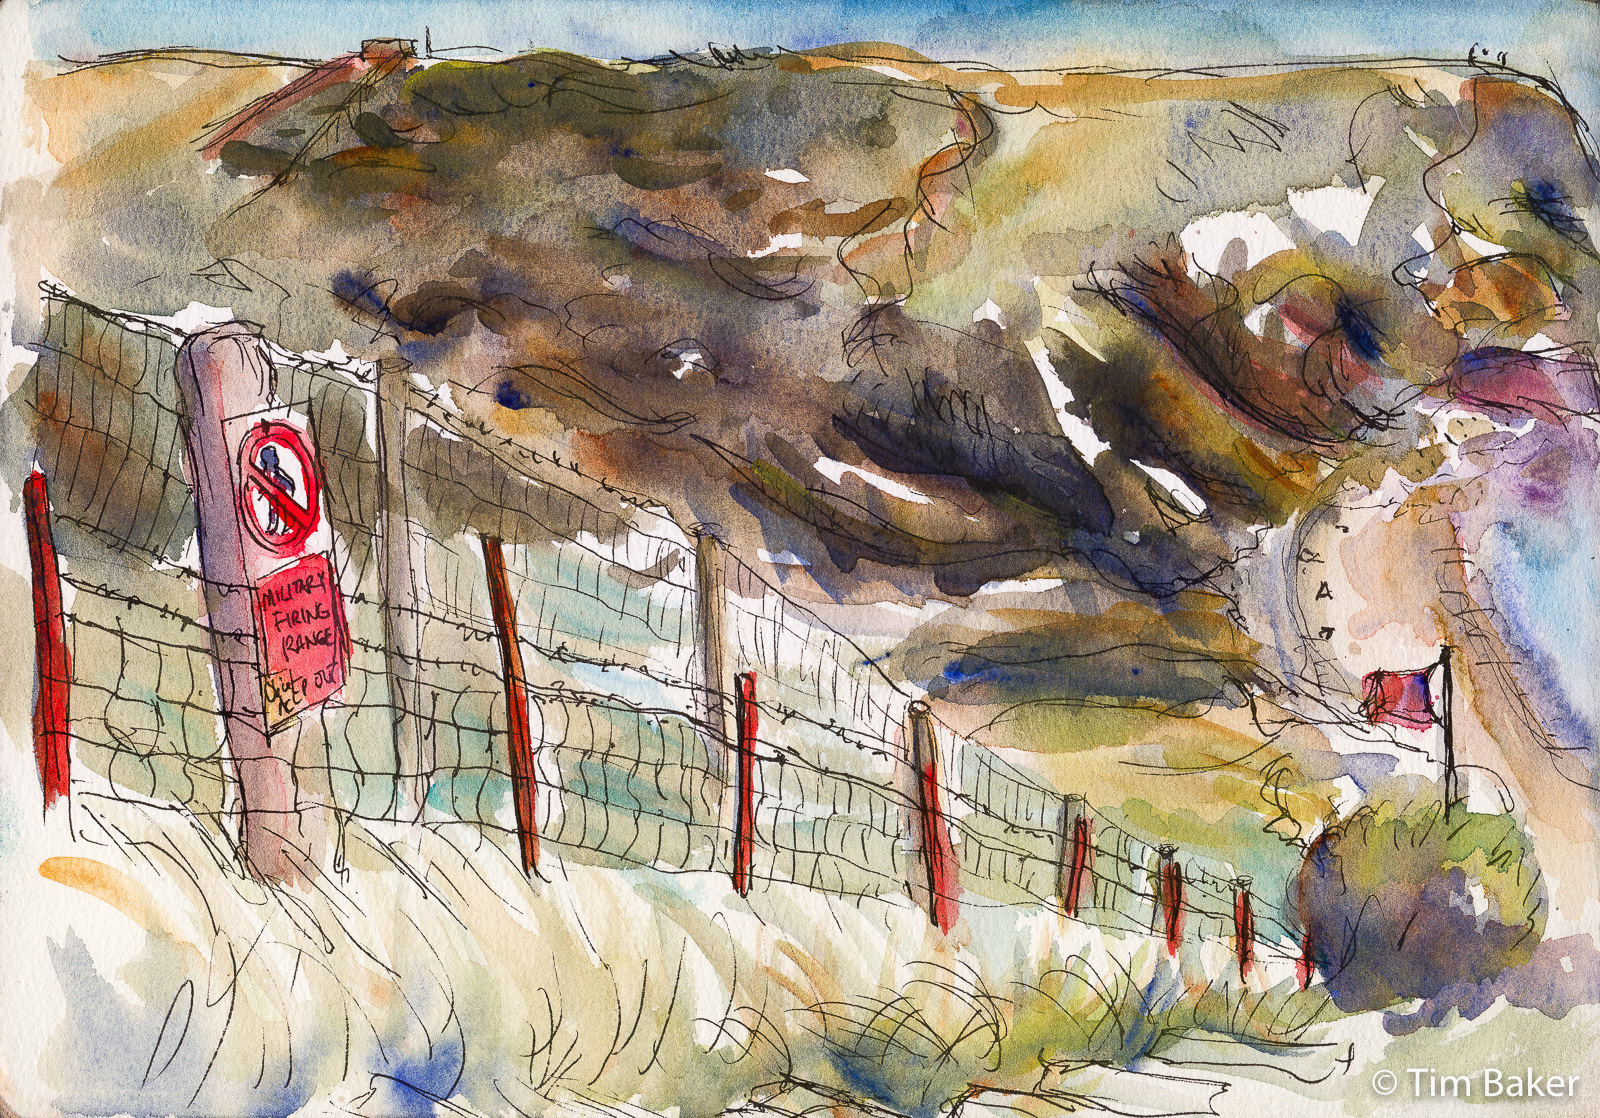 We'll Keep The Red Flag Flying Here, (Lulworth Cove) fountain pen and watercolour, A4 etchr sketchbook. Dorset Jurassic Coast Miltary MOD  Durdle Door Mupe Bay Seascape Sea Painting